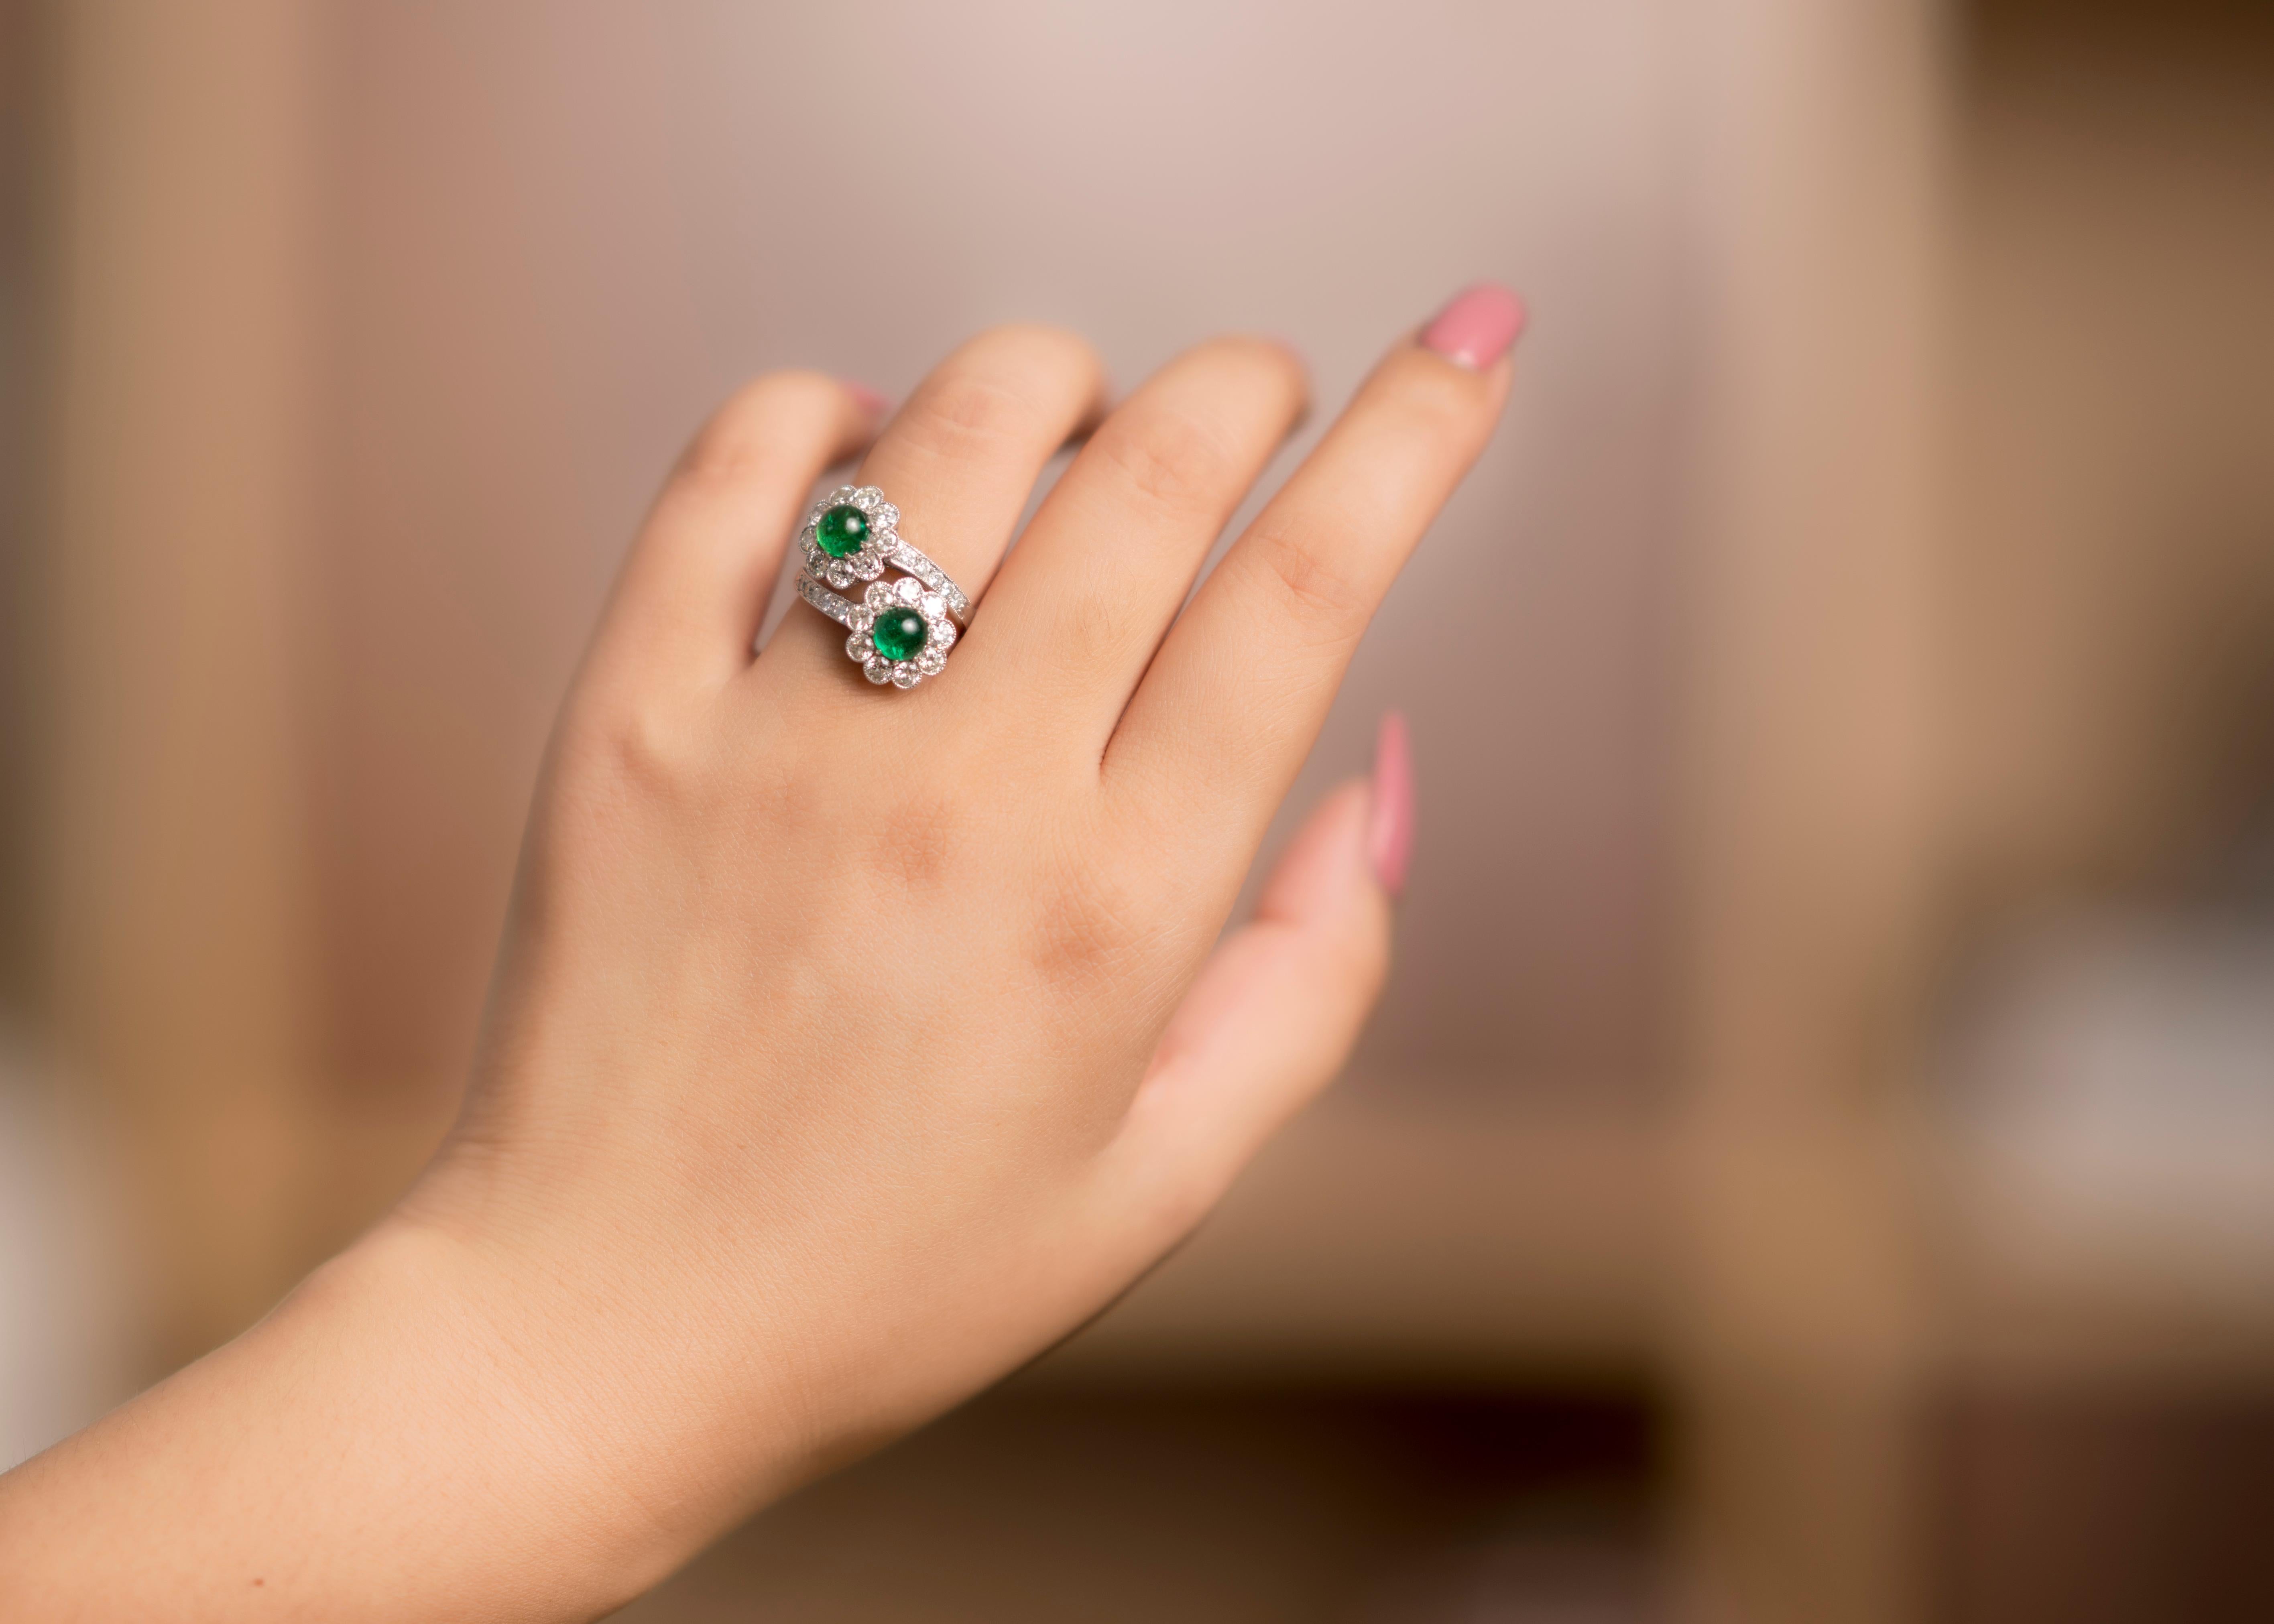 This wonderful cross-over ring made from 18 Karat white gold wraps your fingers with two flower heads crafted from emeralds against bright and lively diamonds with a total emerald carat of 1.3 and diamond carat of 1.36.

The emeralds are a vivid